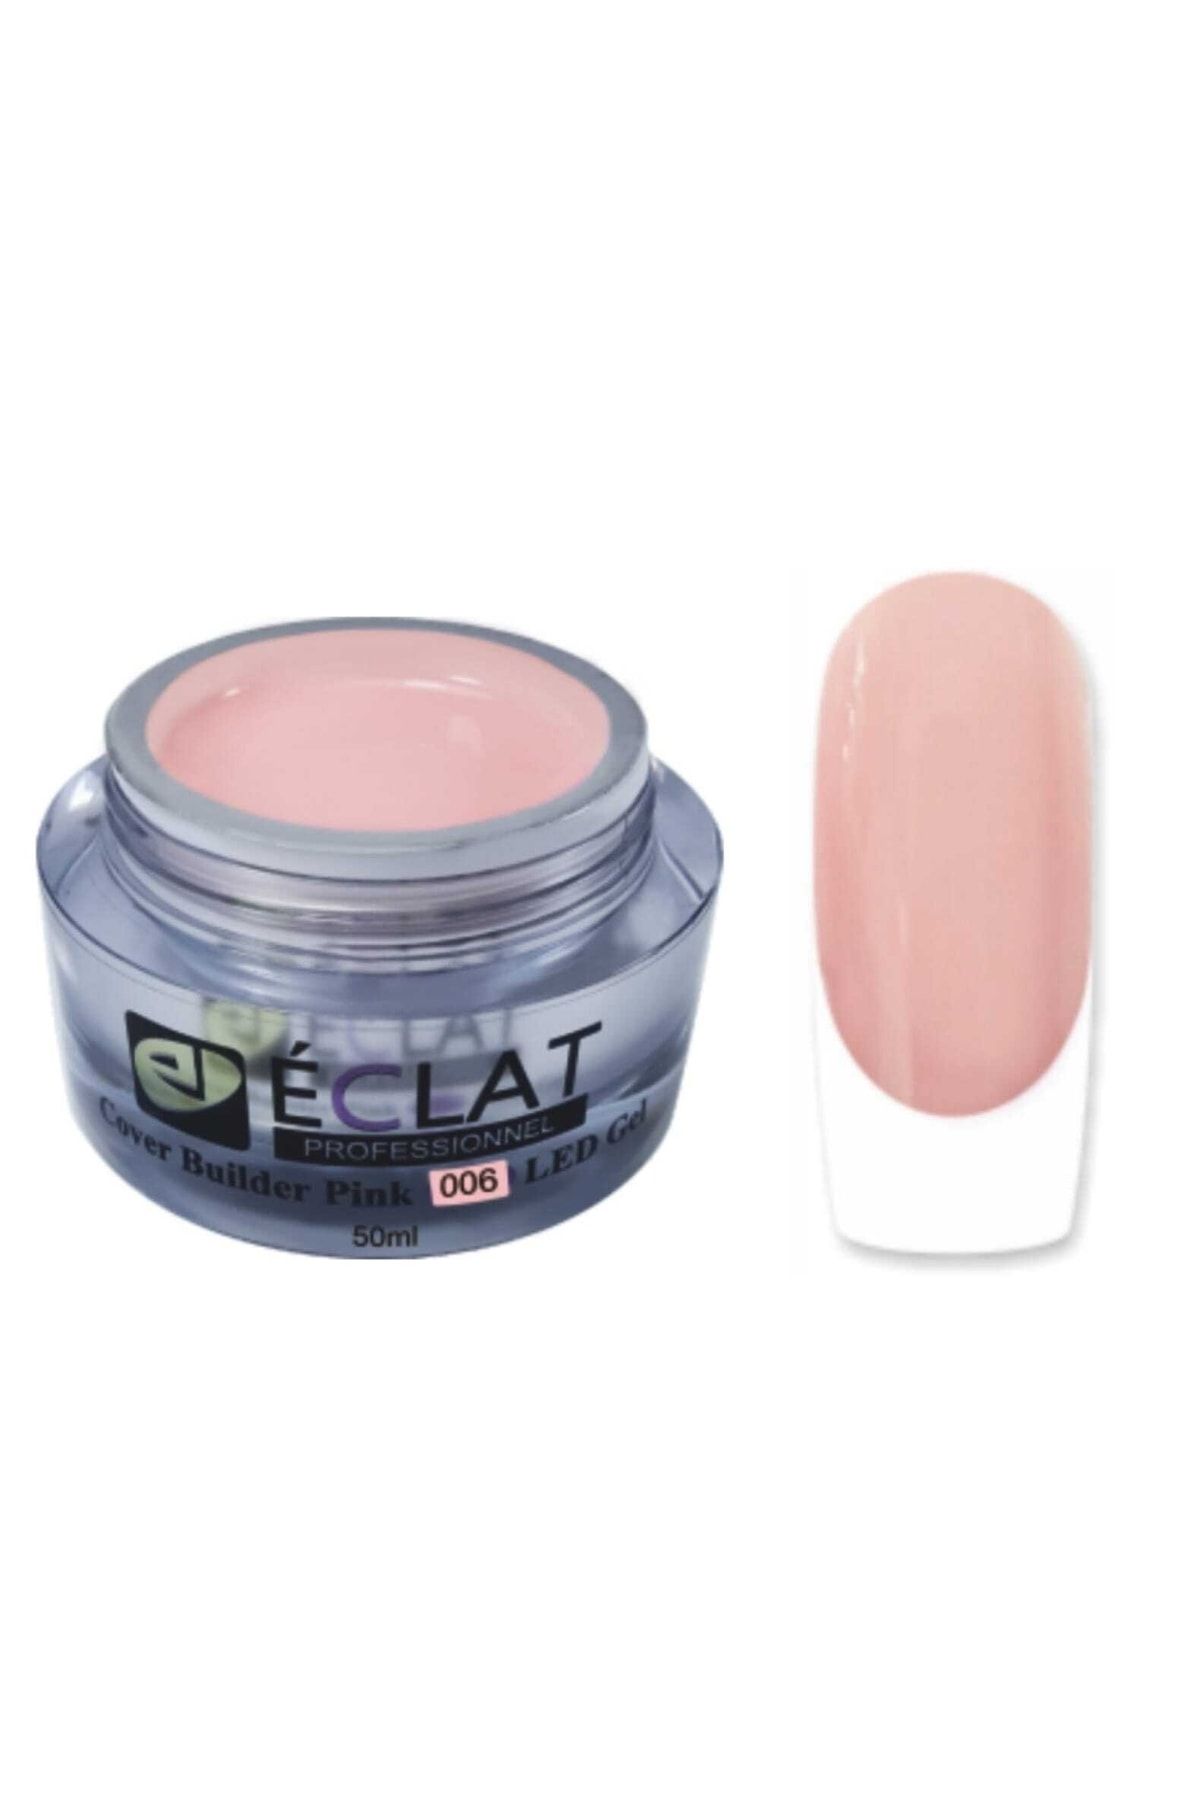 ECLAT Super Strong Cover Camouflage Pink No: 006s Builder Jel (50ml)